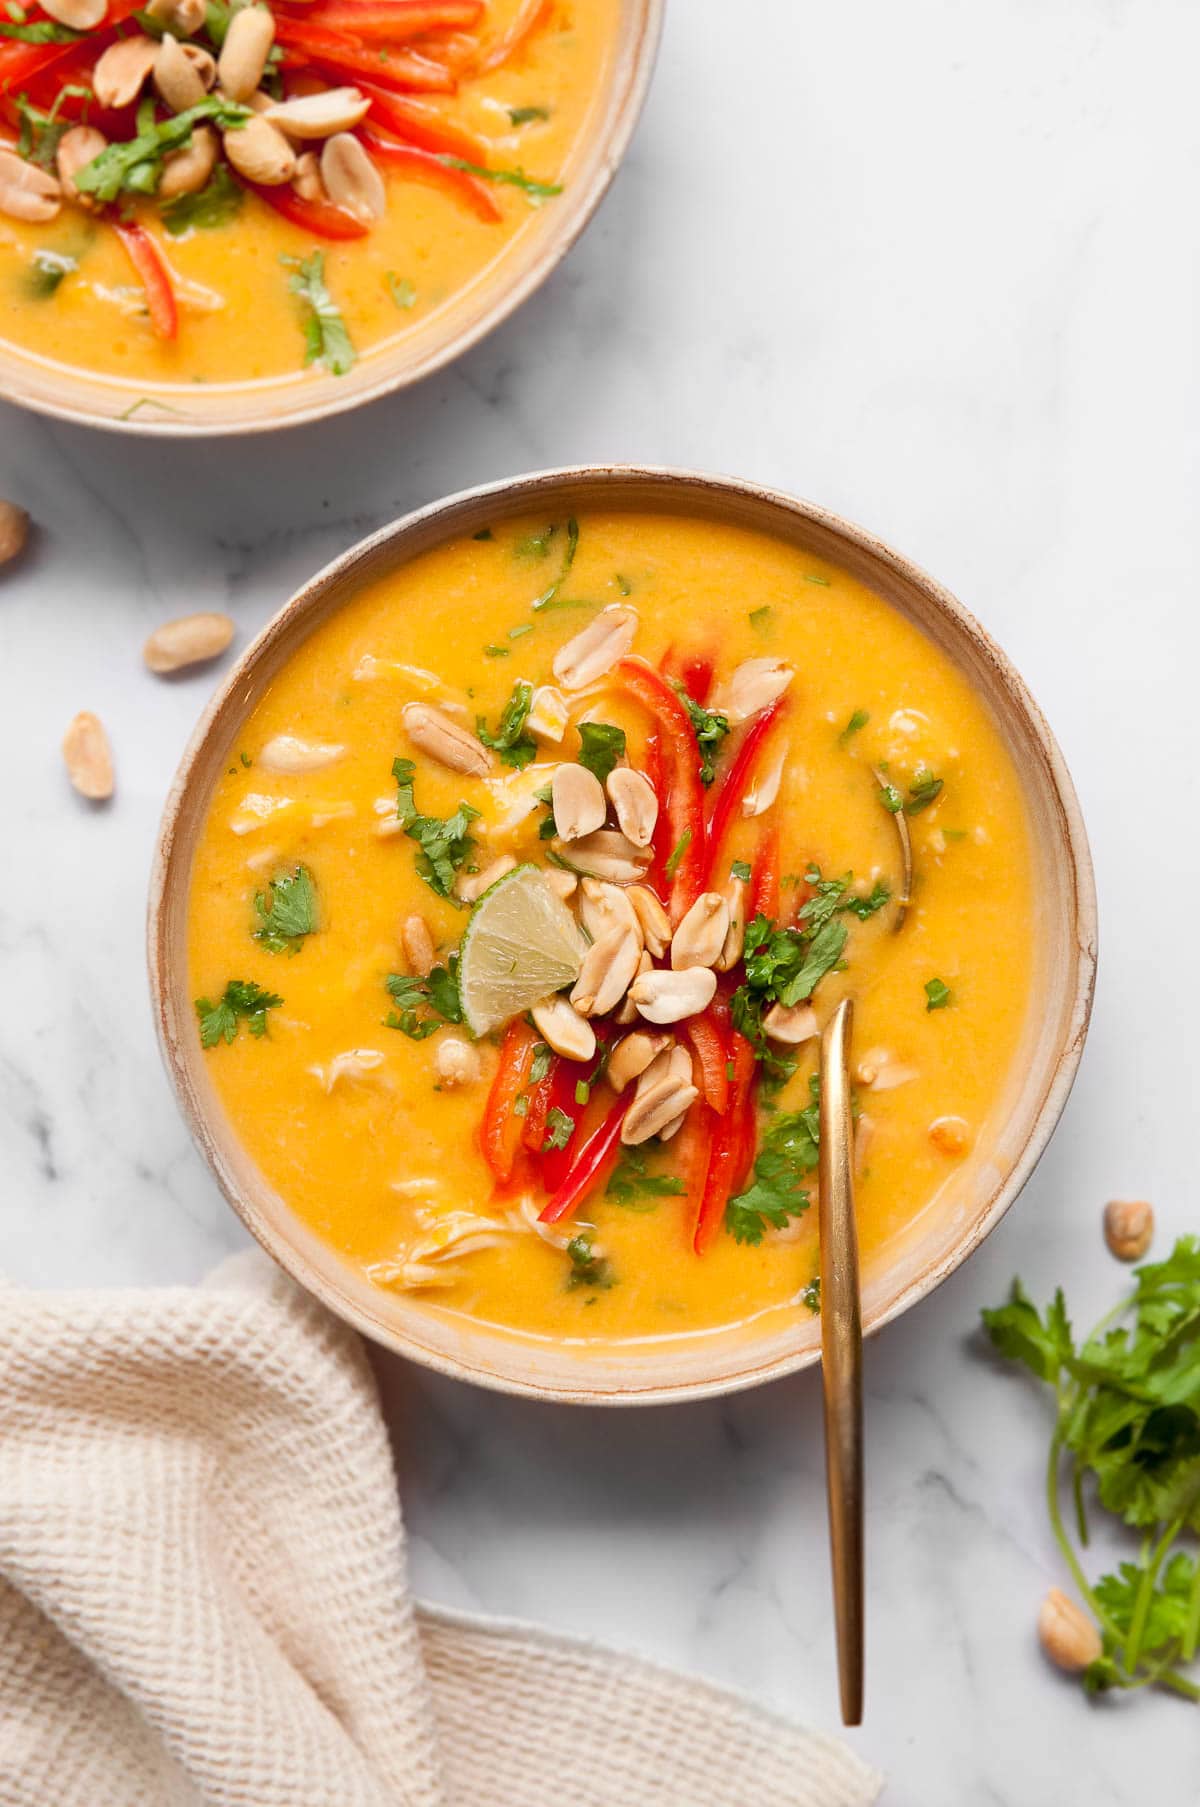 Thai chicken butternut squash with red pepper, peanuts and cilantro in a bowl.